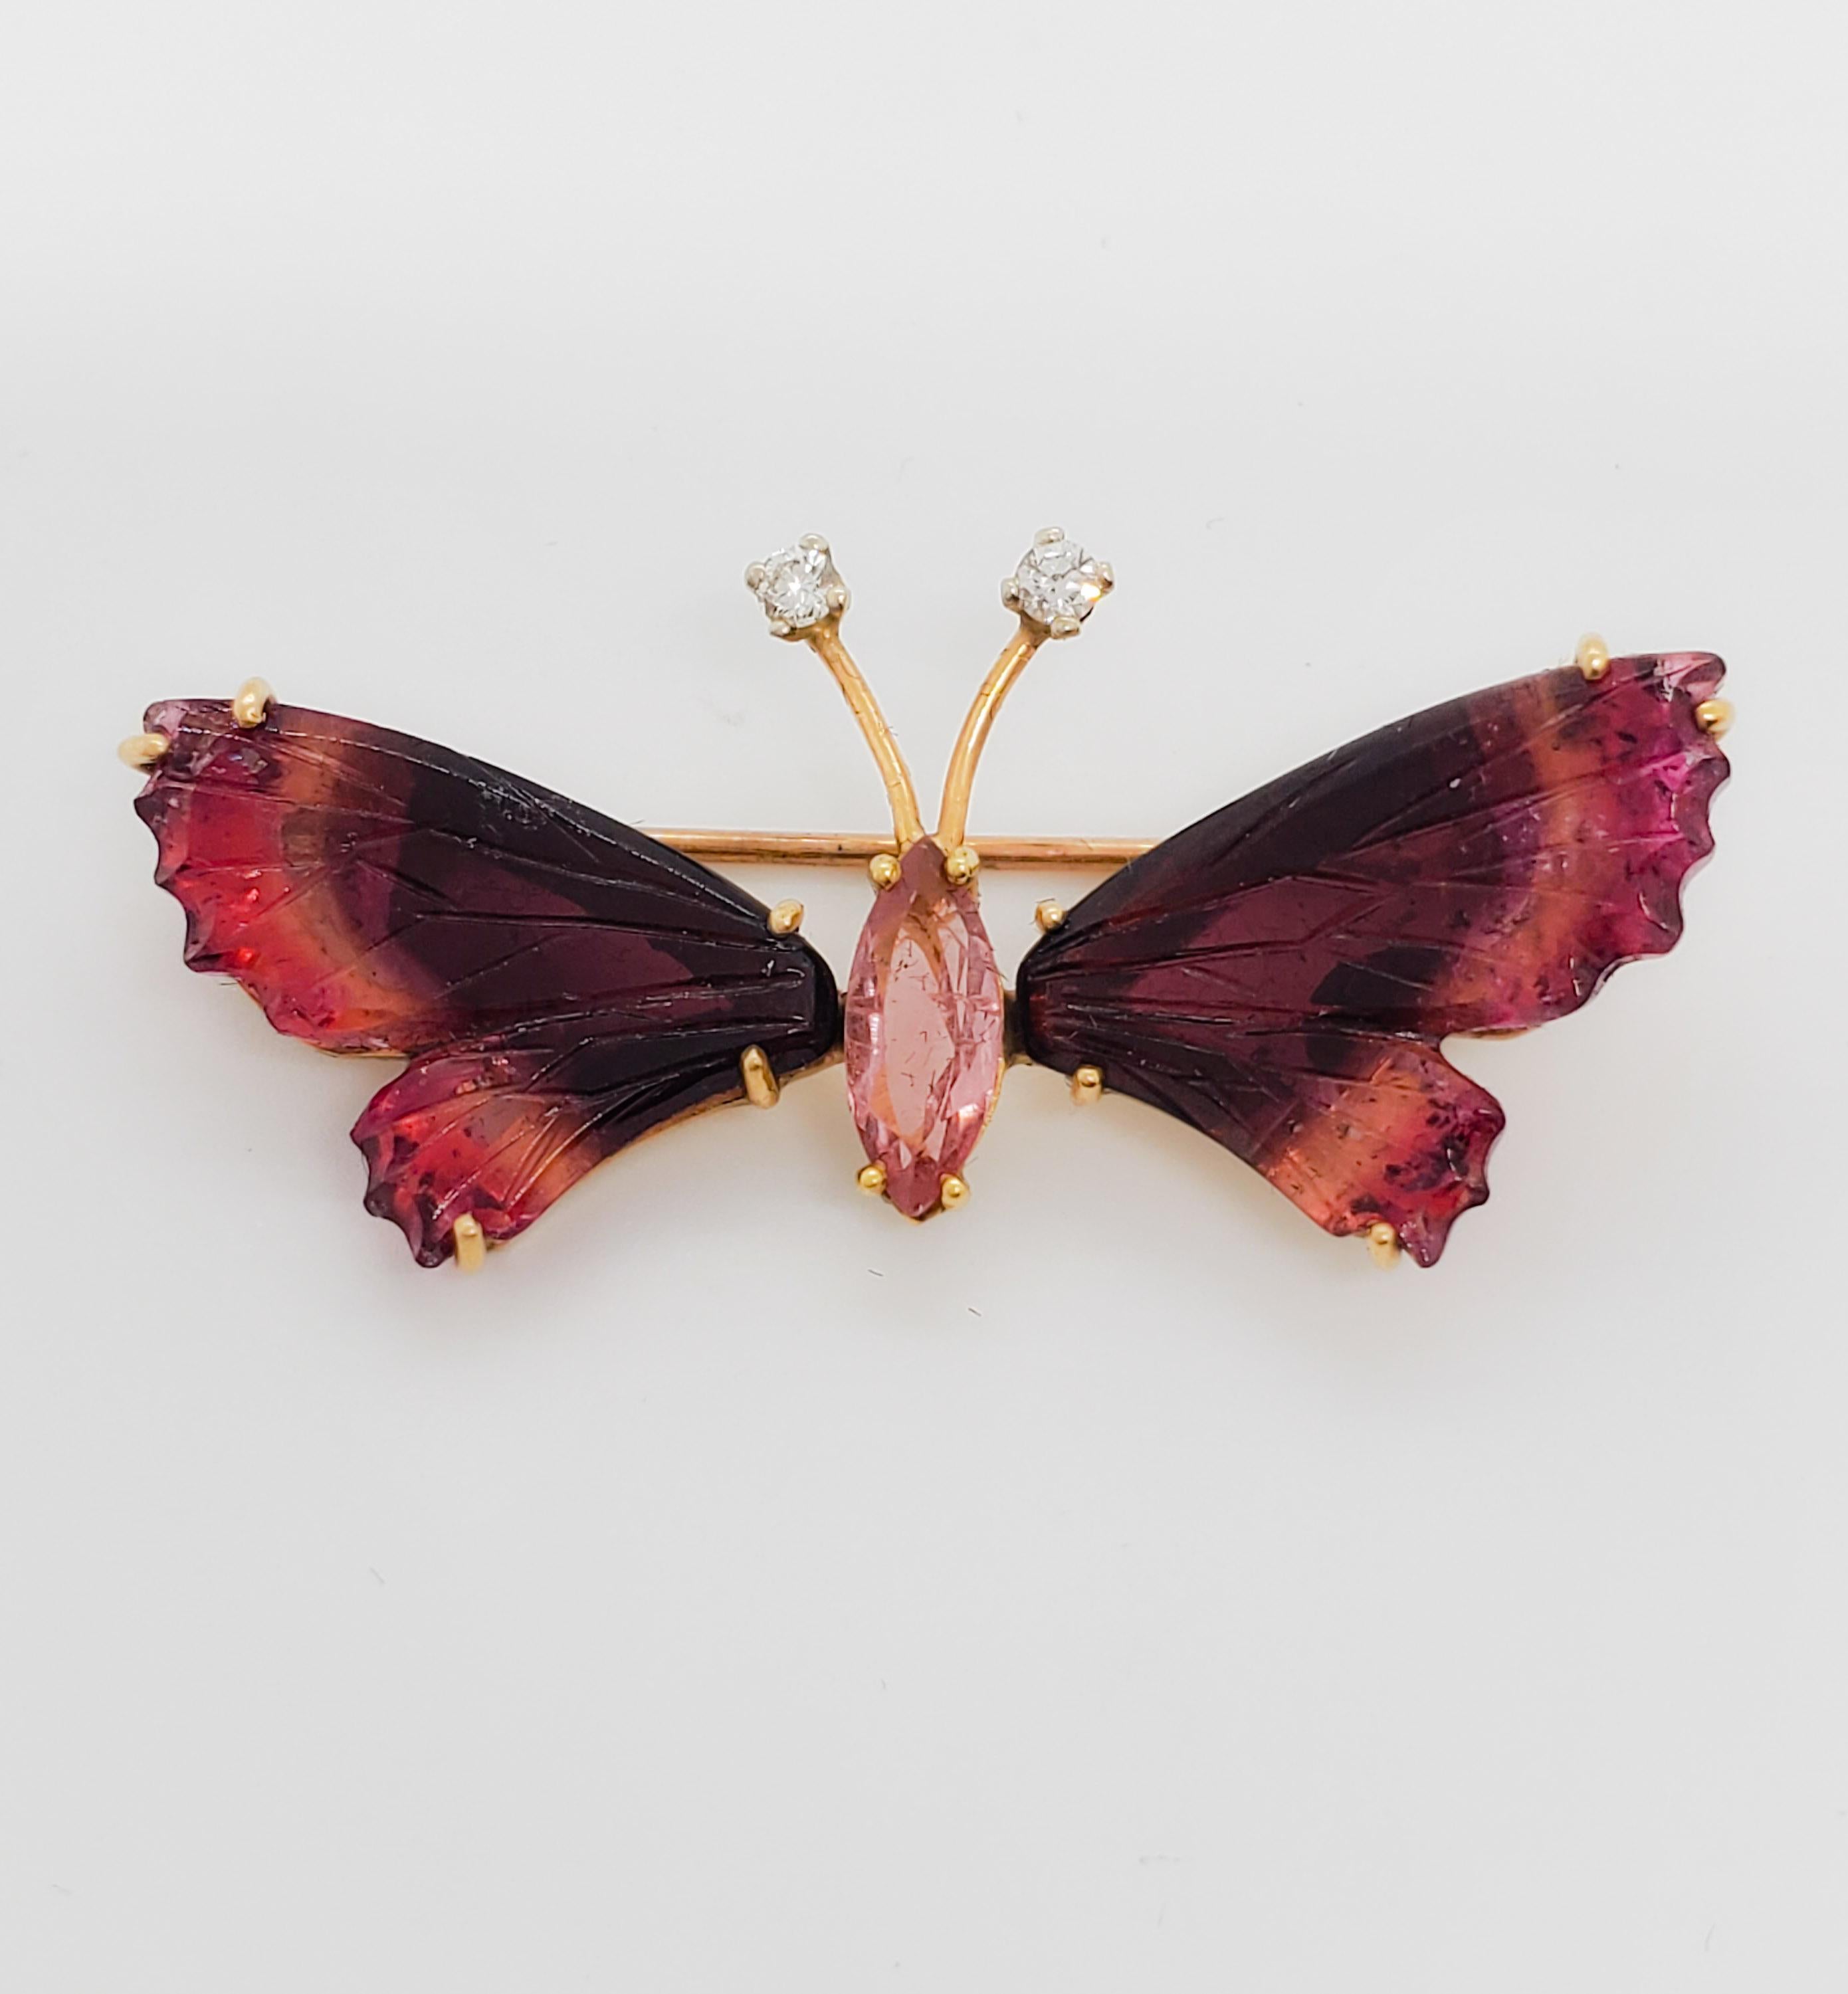 Beautiful brooch featuring 15 ct. of deep pink carved tourmaline as wings and center body of butterly.  0.05 ct. good quality white diamond rounds as antennae.  Handmade in 14k yellow gold.  Great attention to detail, dainty, and feminine.